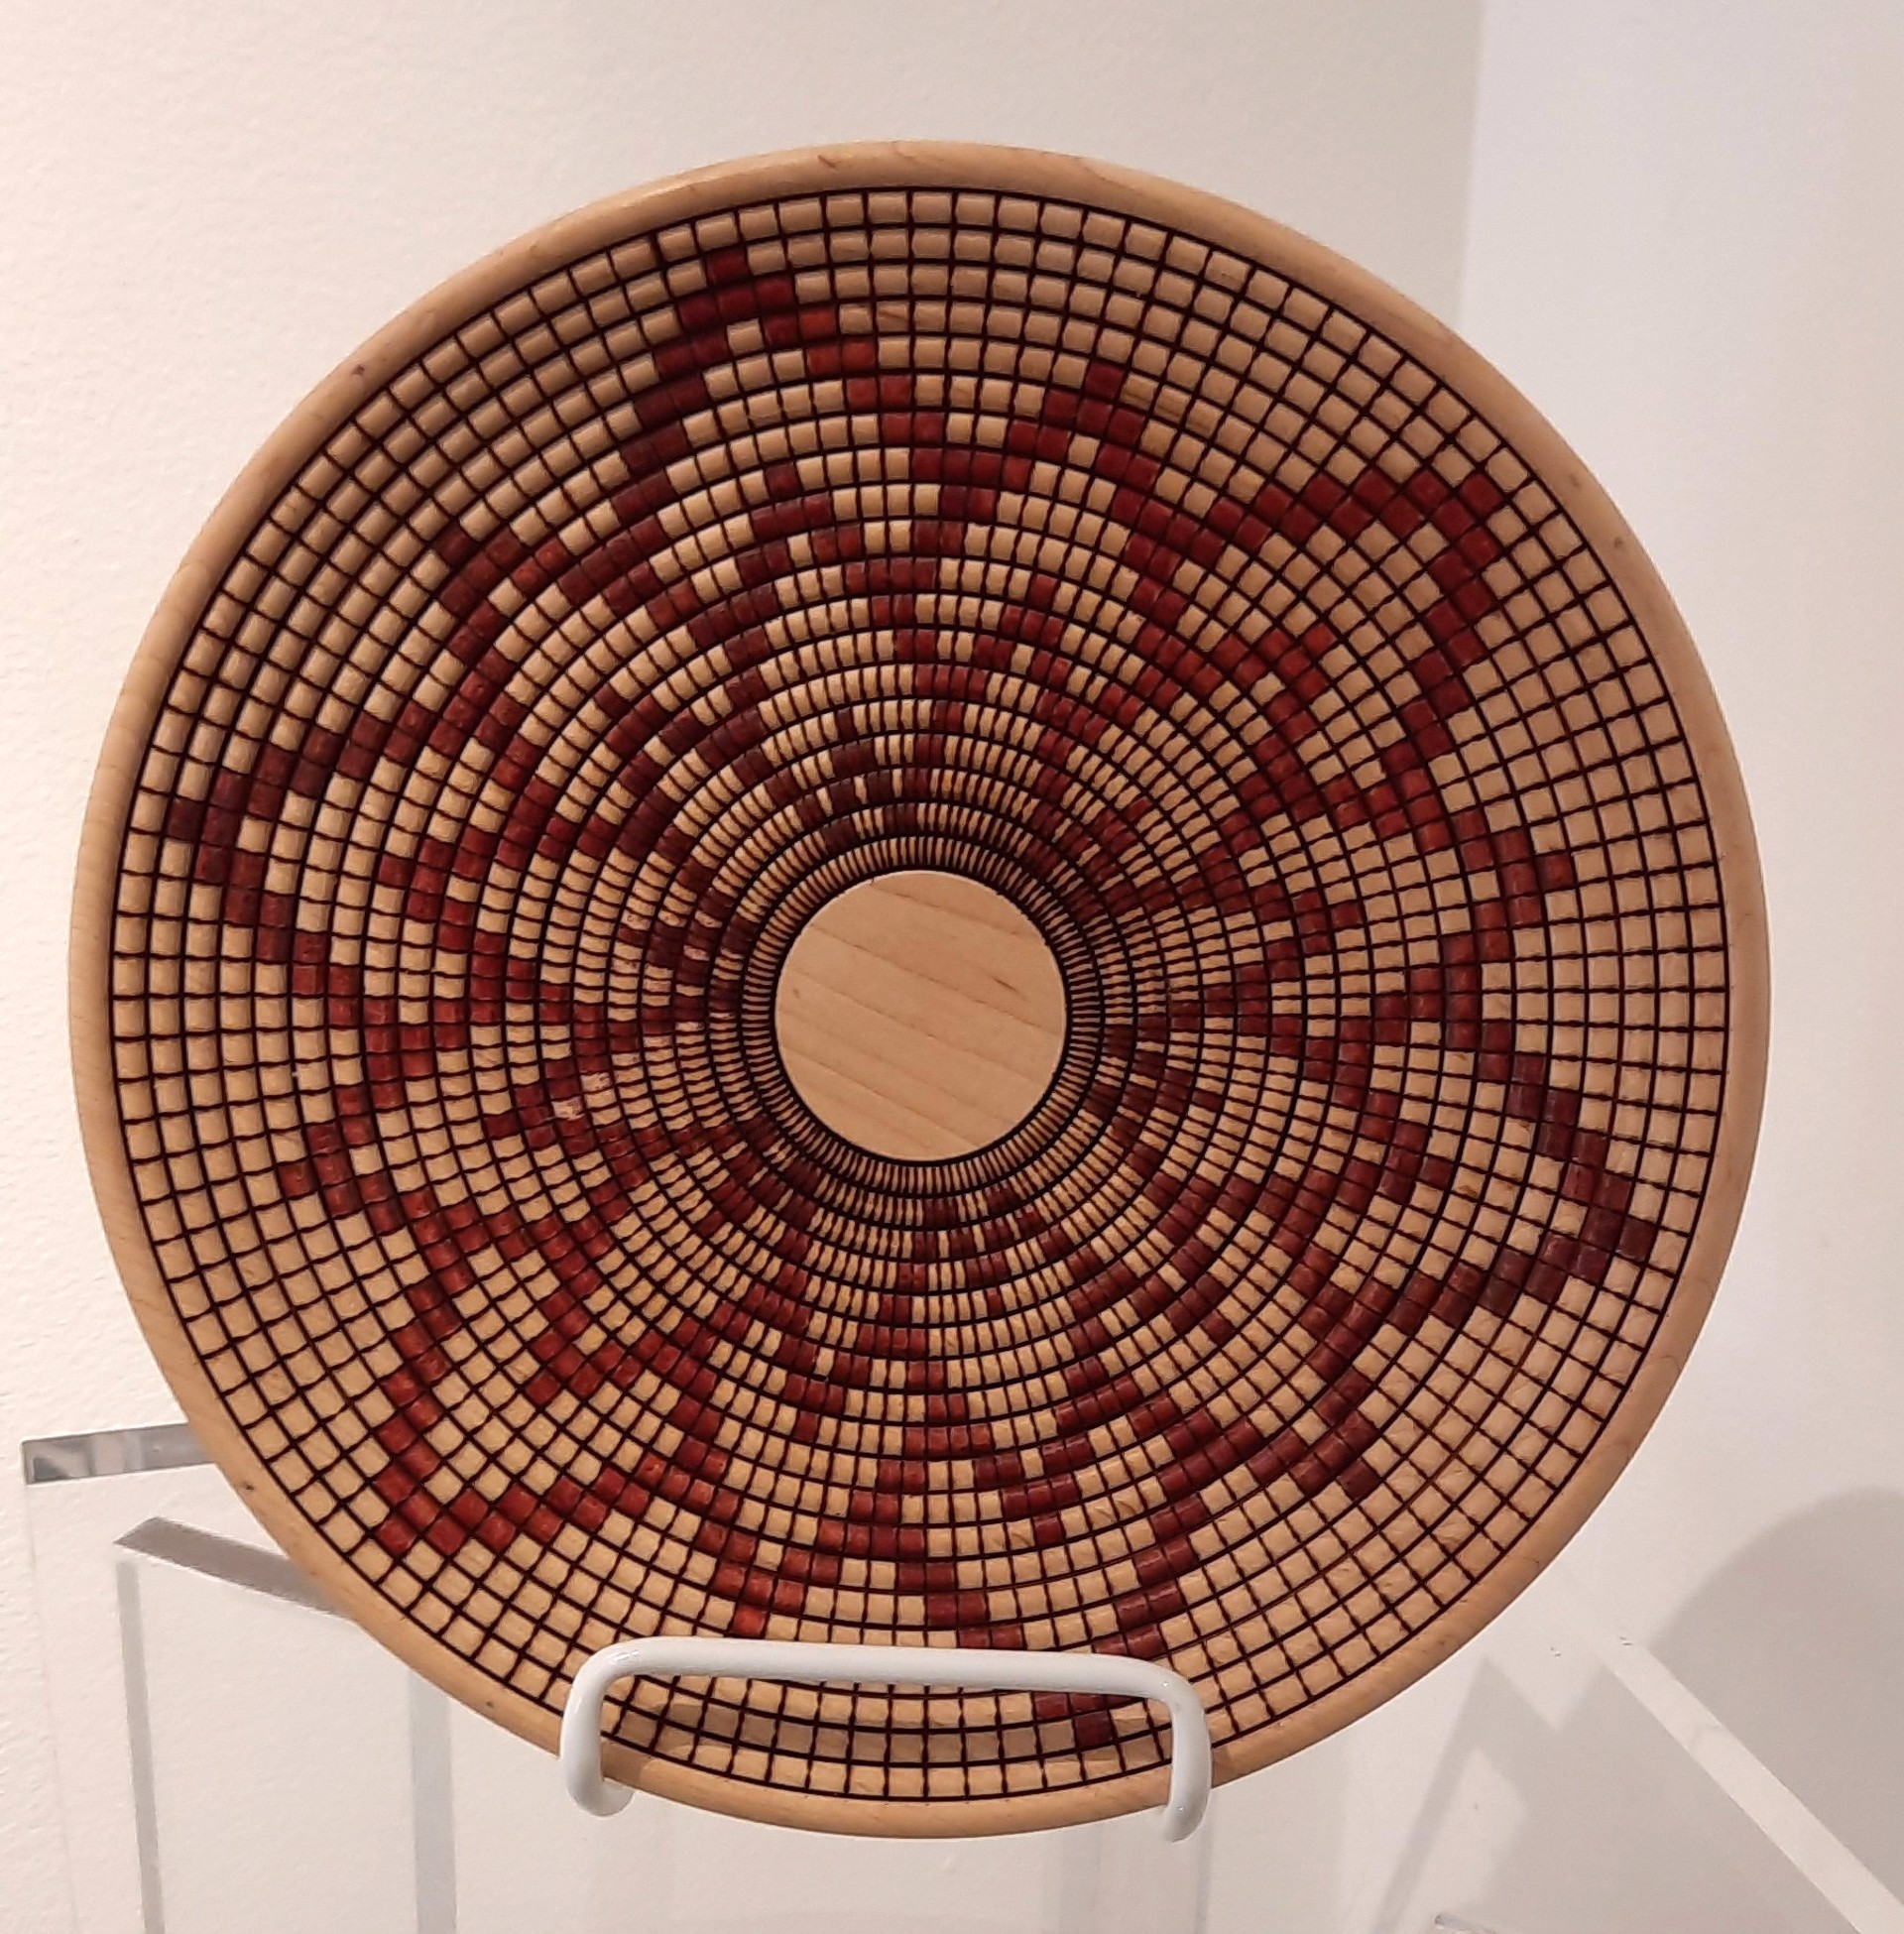 Sunset Basket Weave Plate by Michael Earley